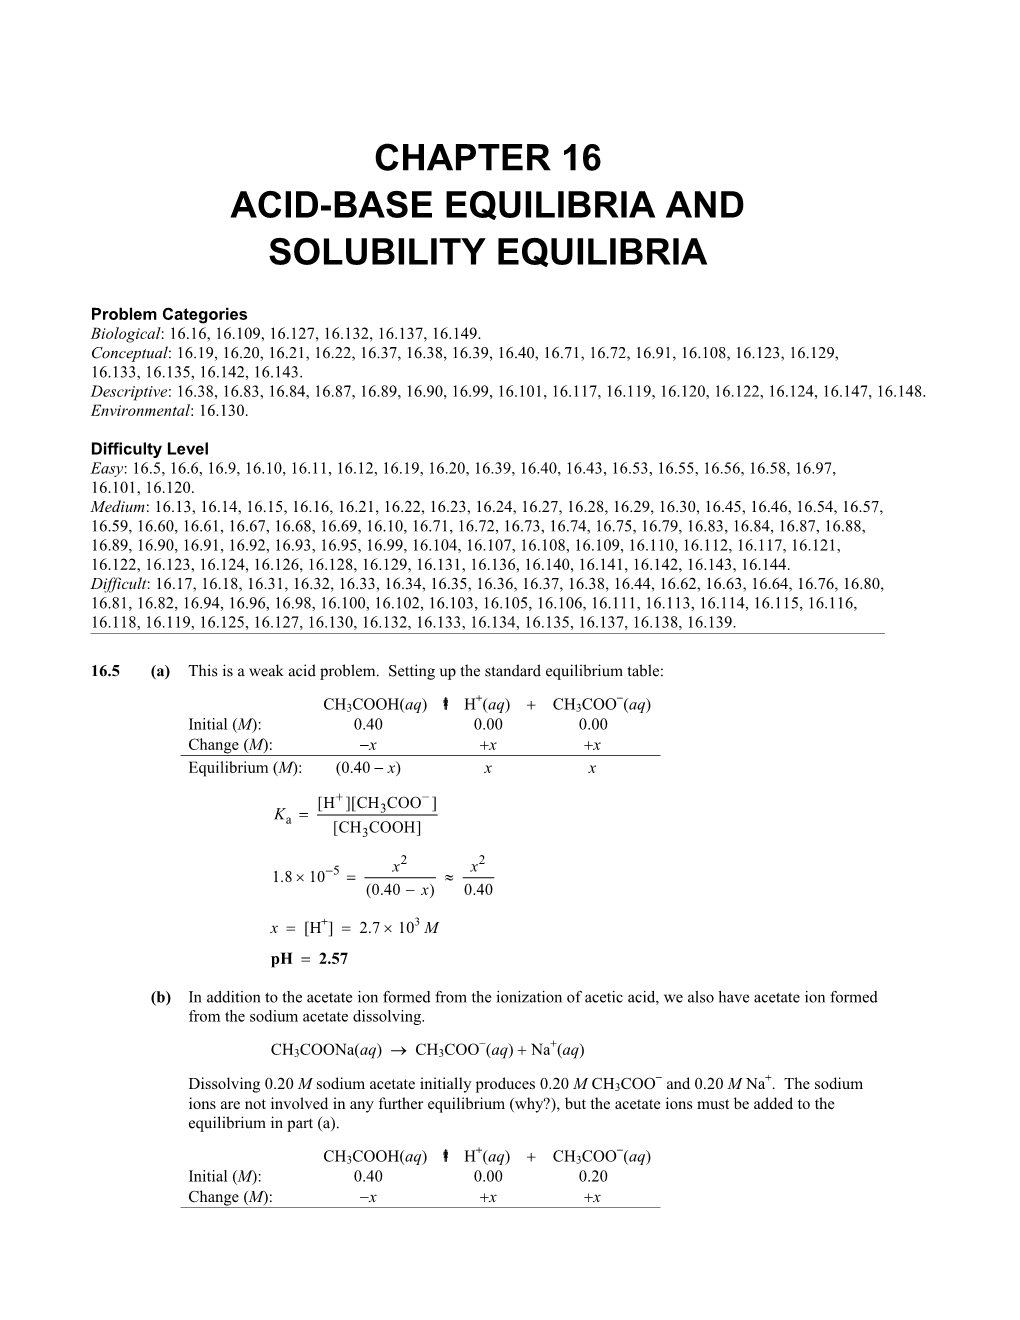 Chapter 16: Acid-Base Equilibria and Solubility Equilibria